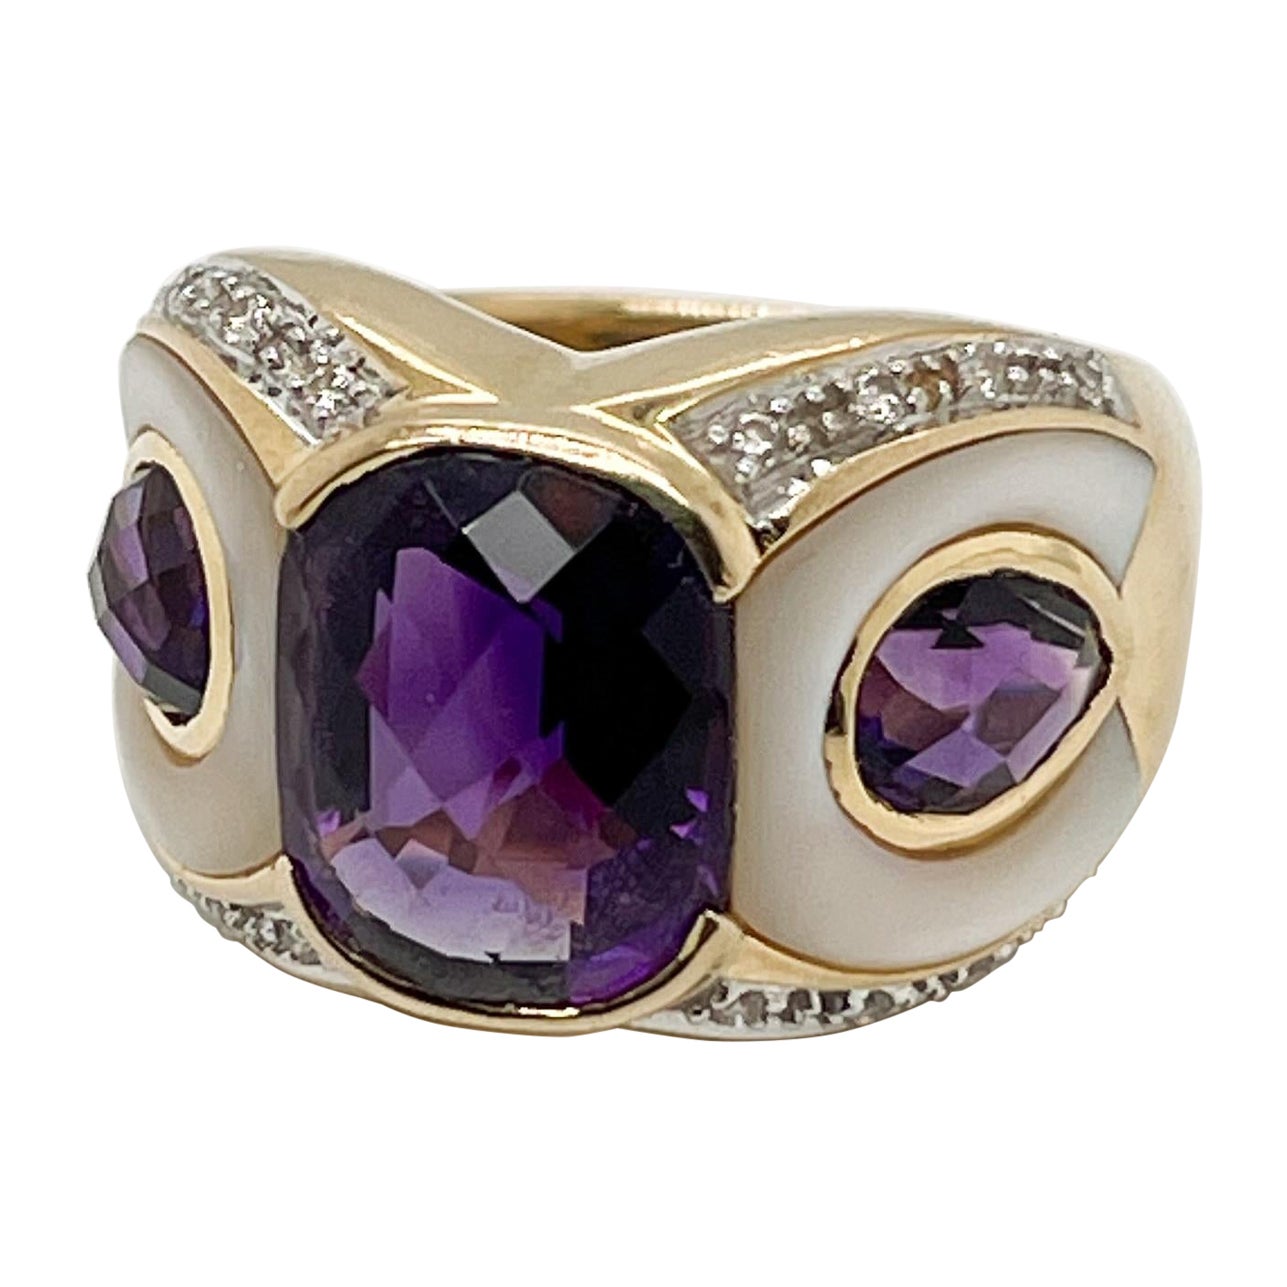 Owl/Parrot Bird Cocktail Ring in 18k Gold, Mother of Pearl, Diamond & Amethyst